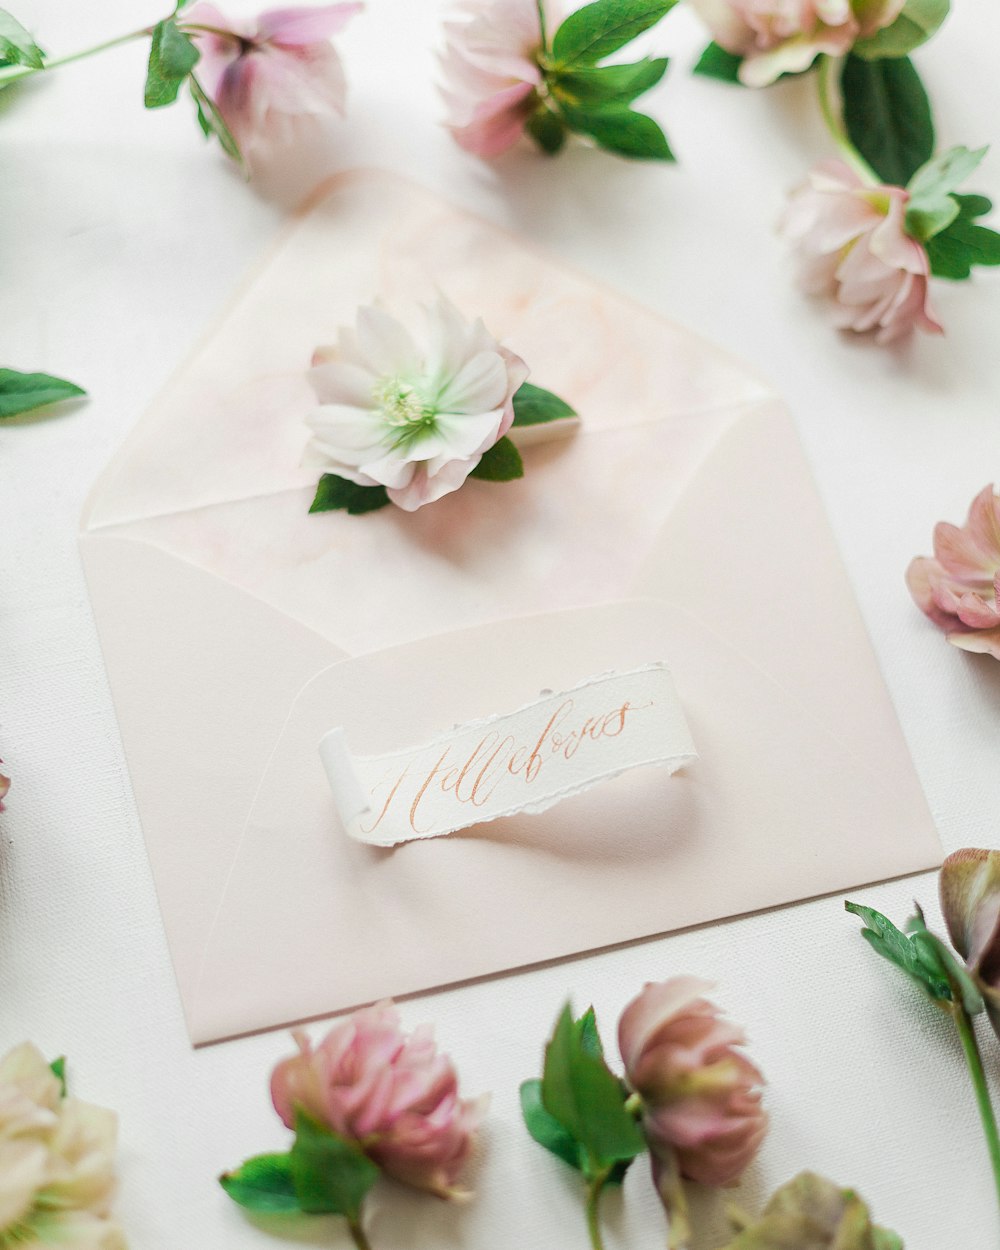 a close up of a card with flowers on it